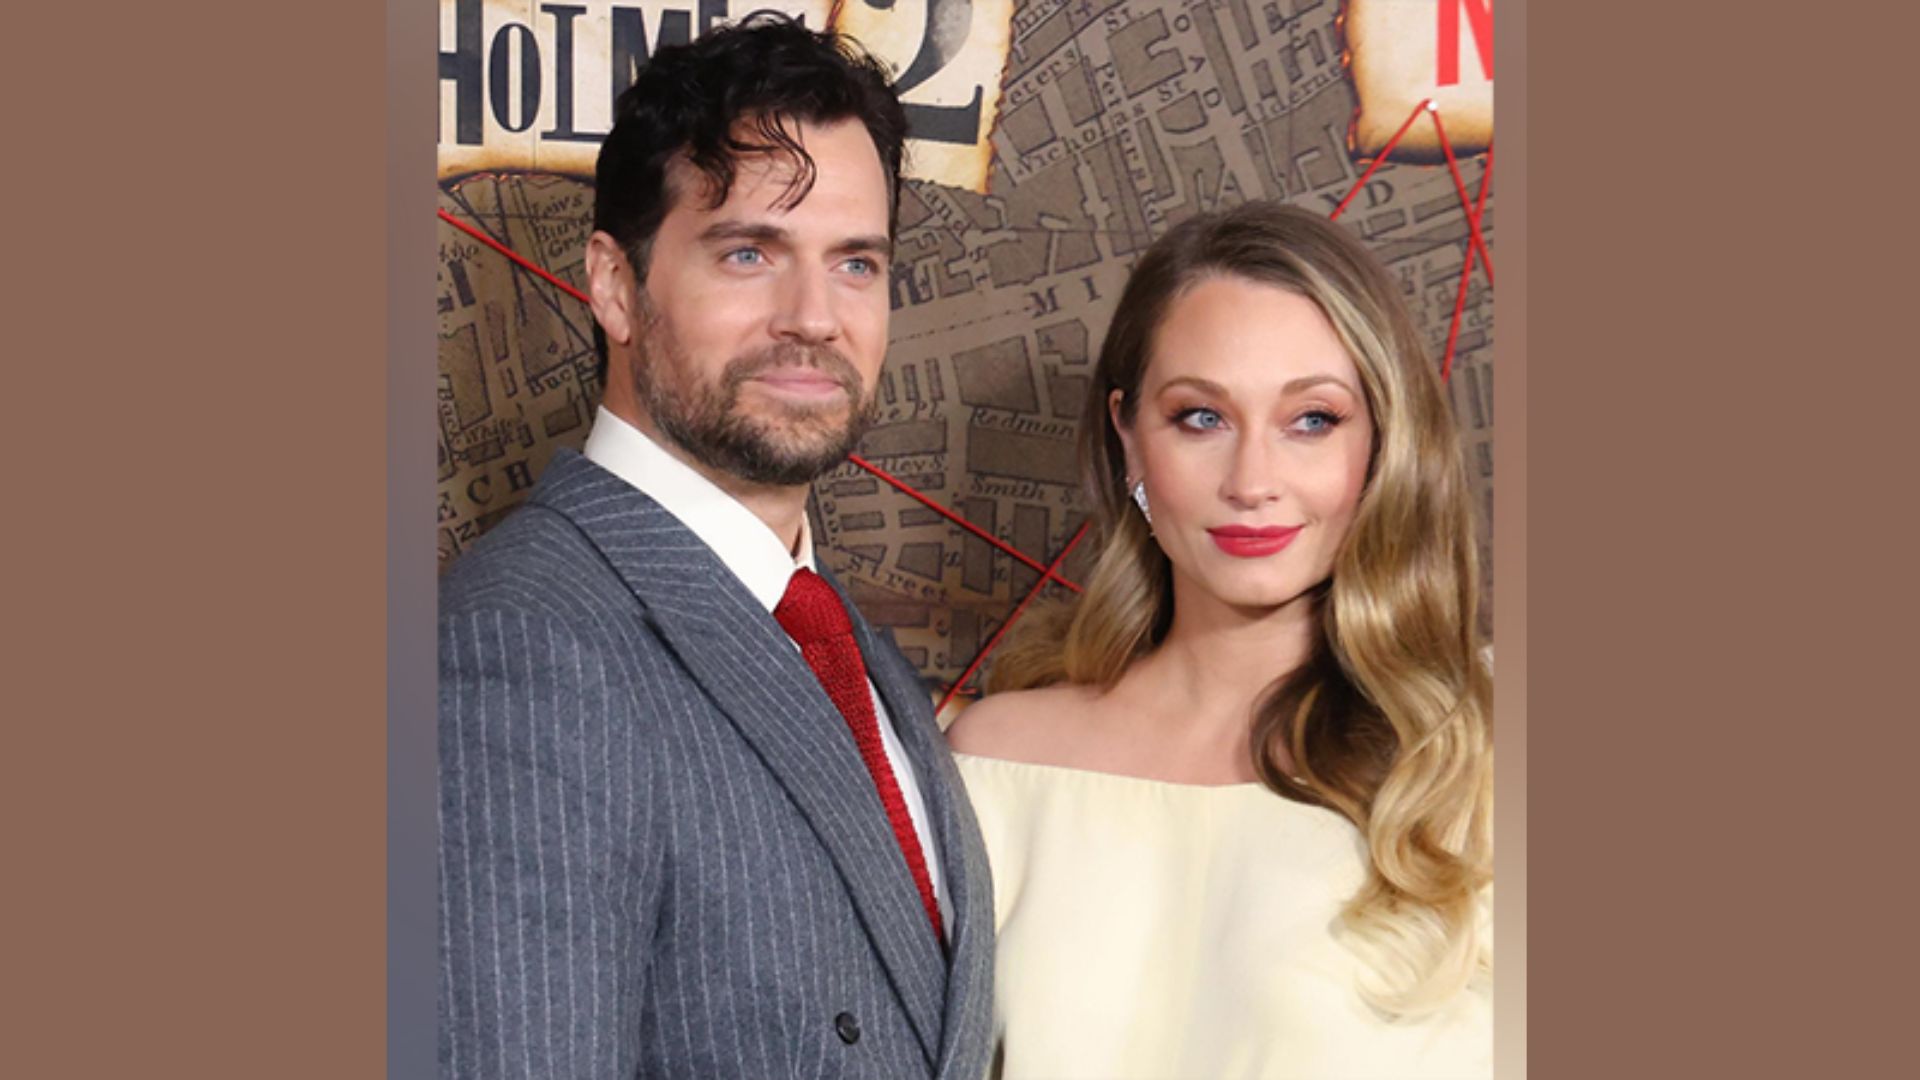 With partner Natalie Viscuso, Henry Cavill expecting his first child